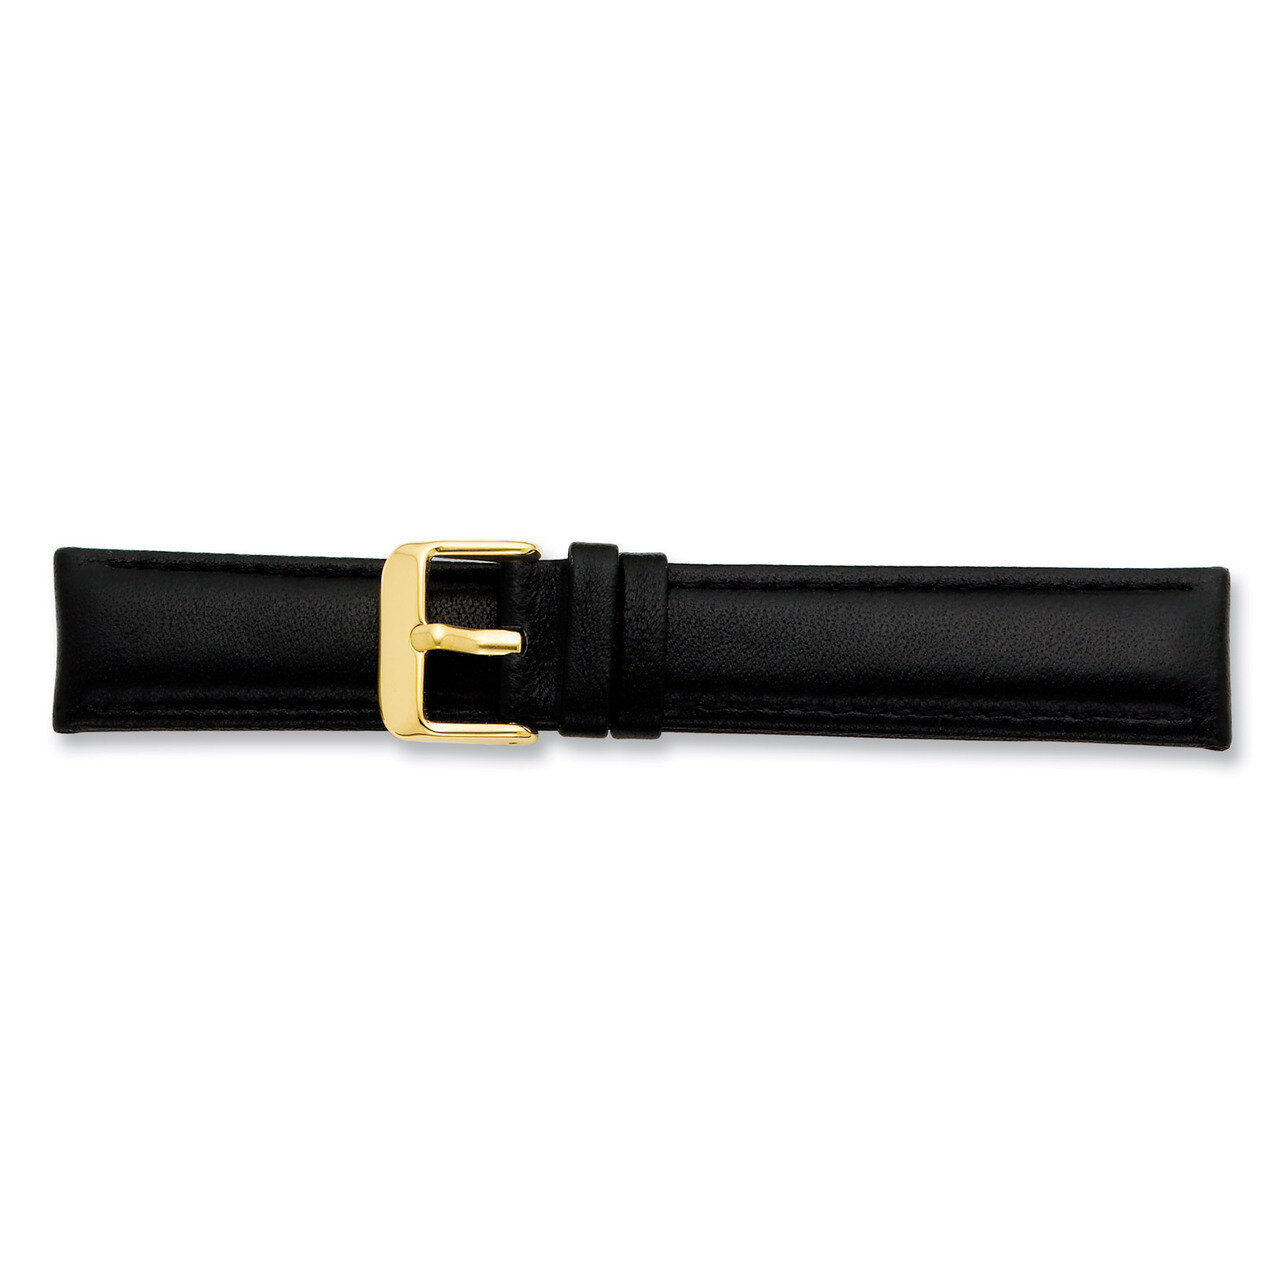 22mm Black Glove Leather Buckle Watch Band 7.75 Inch Gold-tone BA195-22